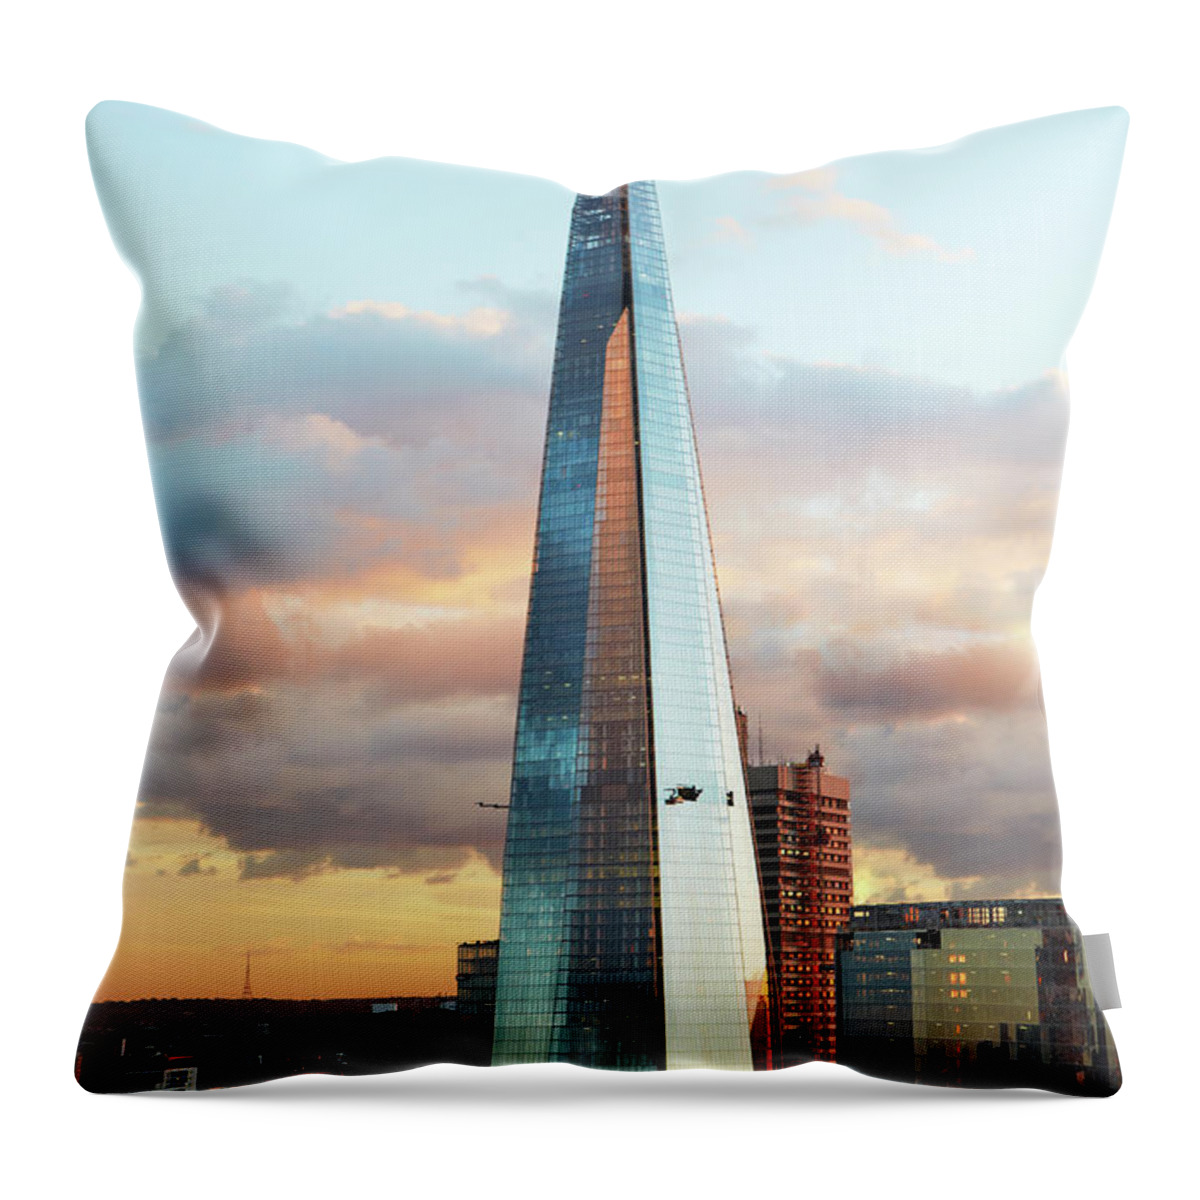 Outdoors Throw Pillow featuring the photograph The Shard Skyscraper At Sunset by Allan Baxter